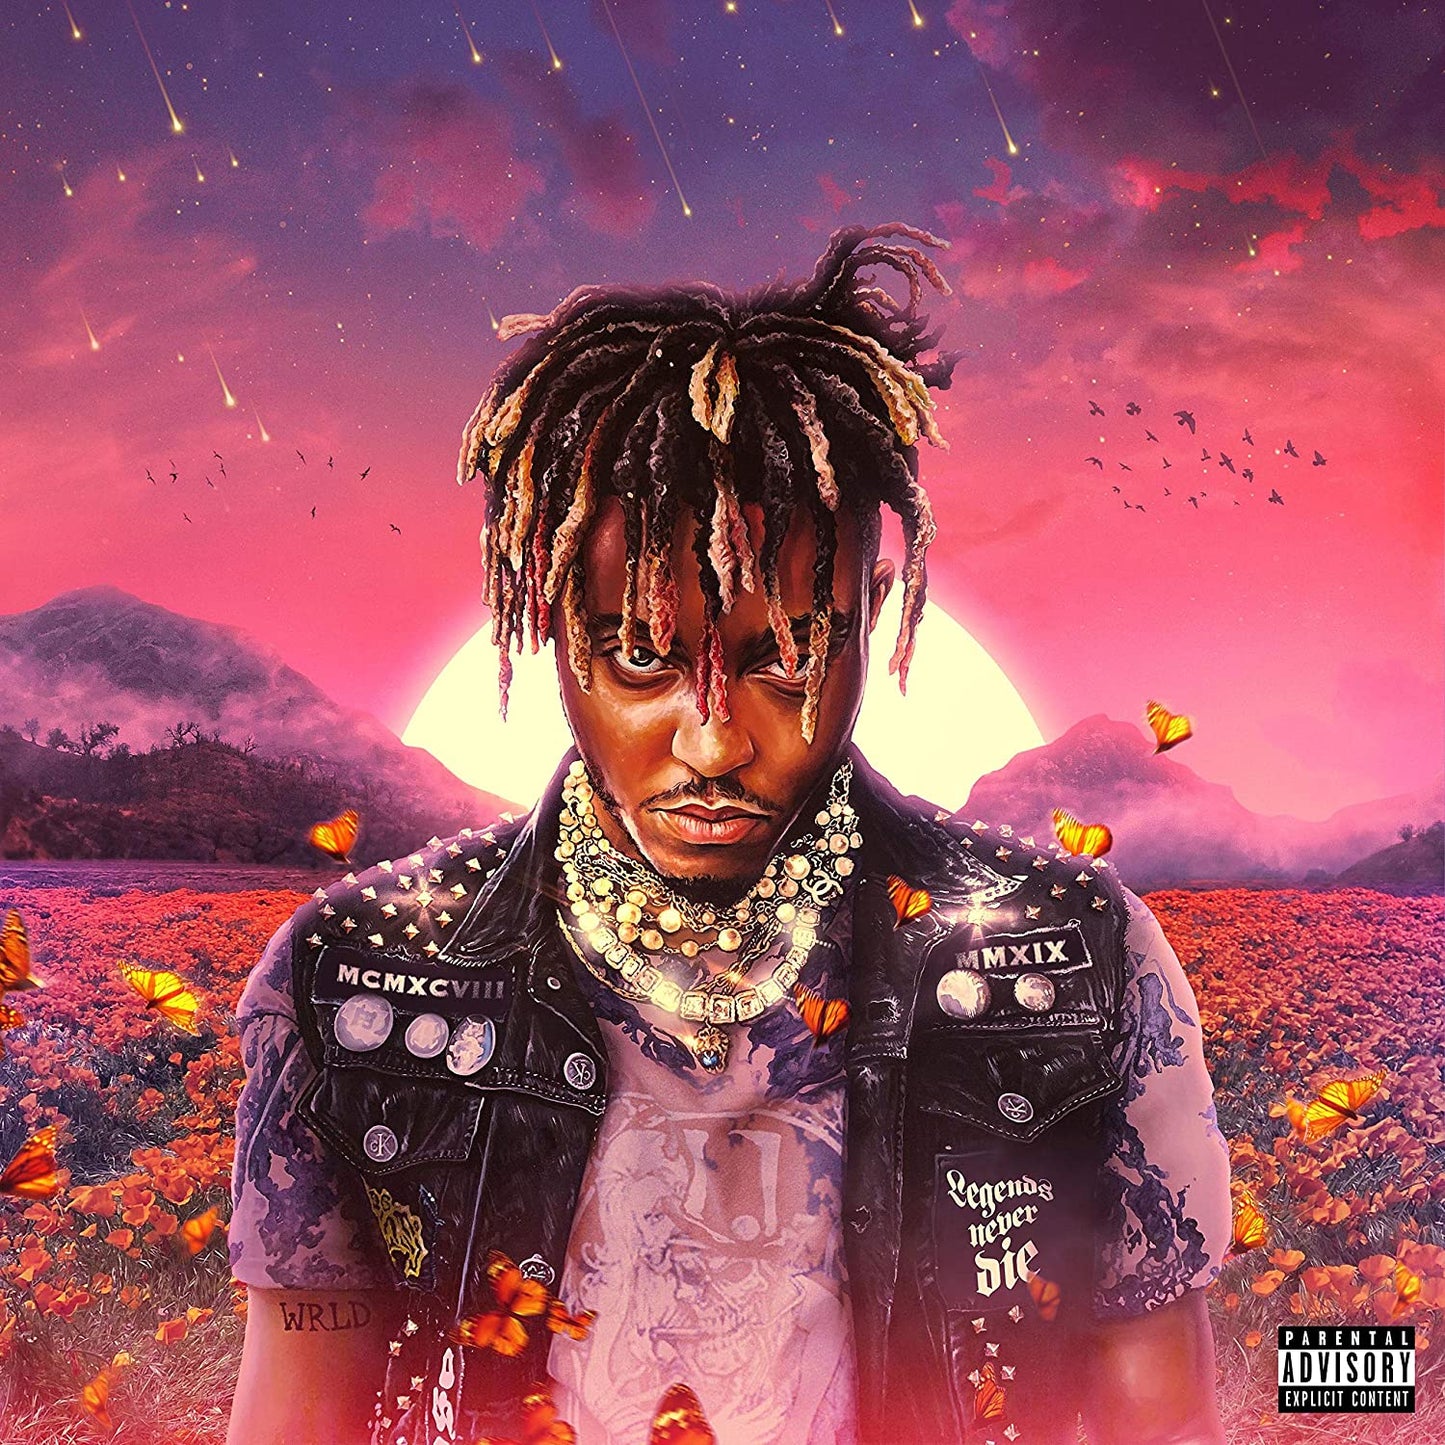 3rd studio album on Vinyl by Juice Wrld, released posthumously after his death on July 10, 2020. The album features guest appearances from The Weeknd, Trippie Redd, Marshmello, Polo G, The Kid Laroi, and Halsey.